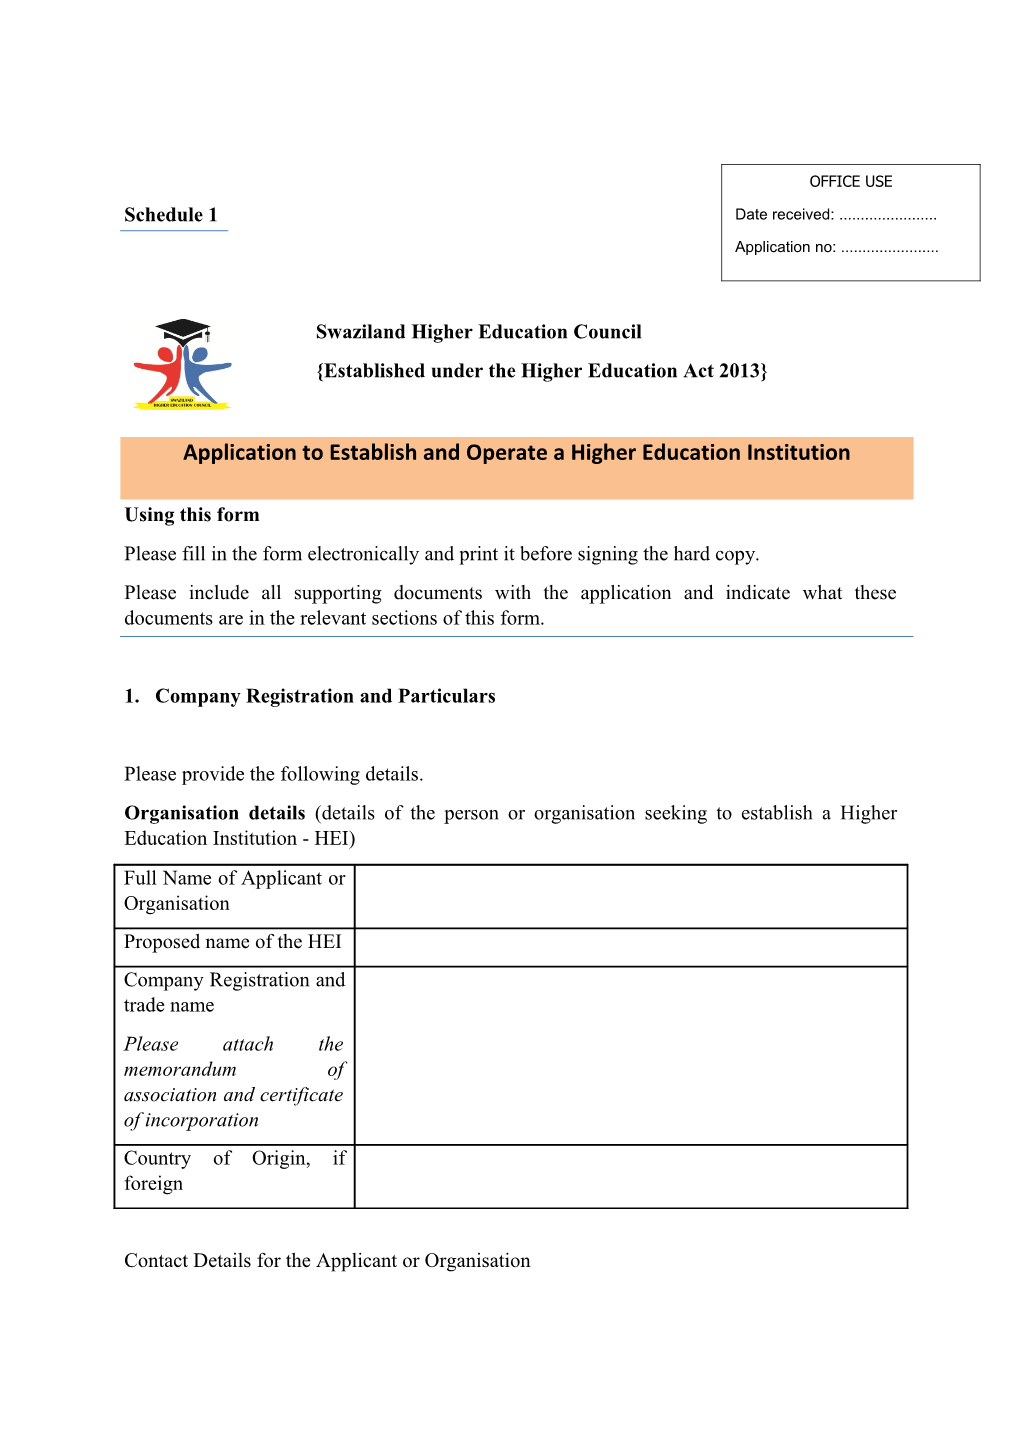 Please Fill in the Form Electronically and Print It Before Signing the Hard Copy